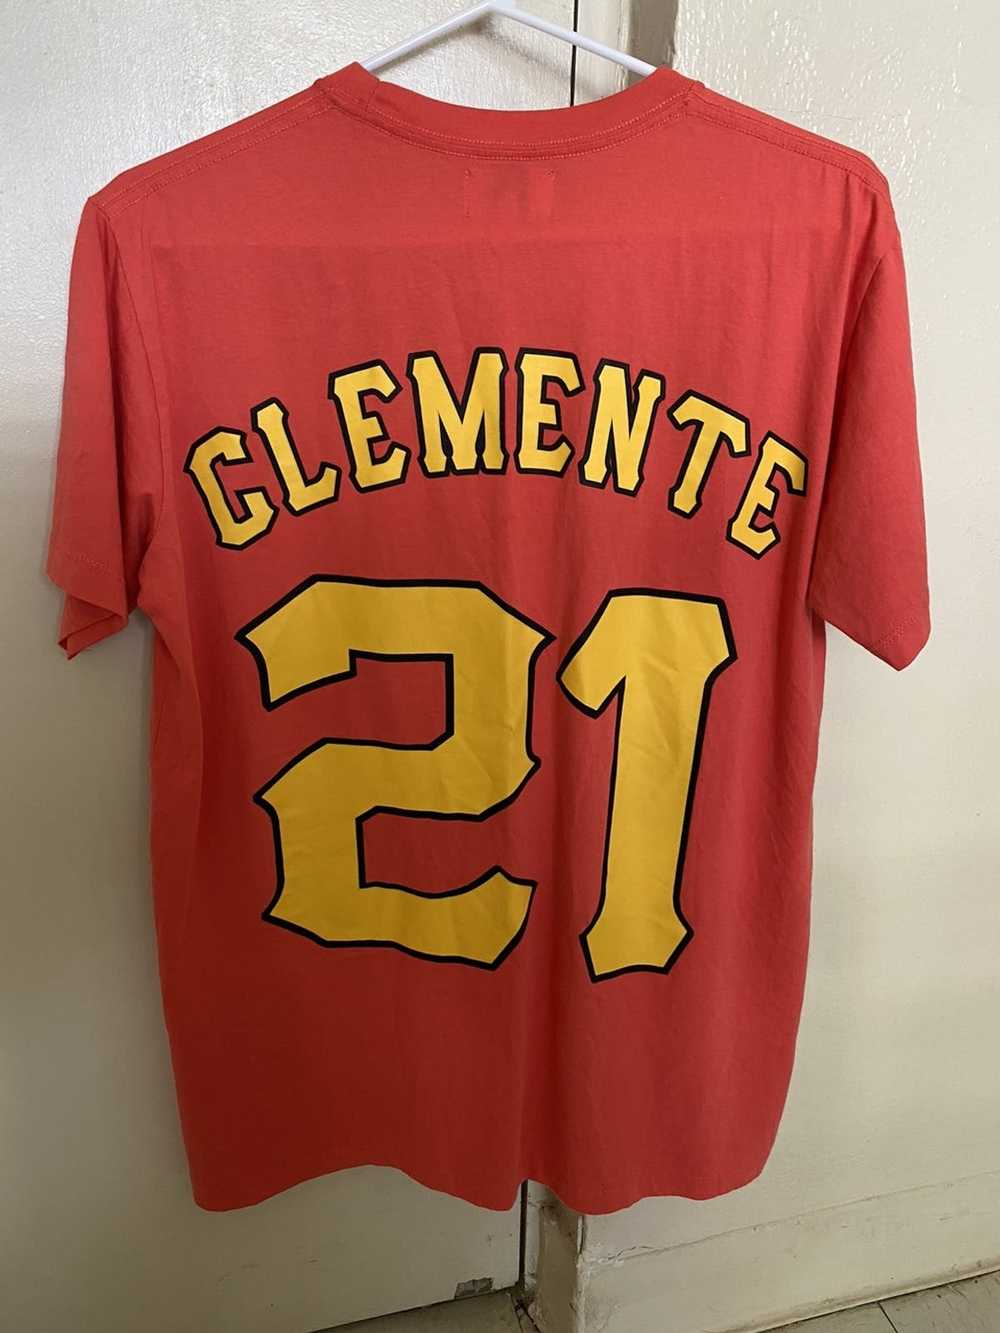 Other ROBERTO CLEMENTE “21” Frsh Co. T Shirt - image 2